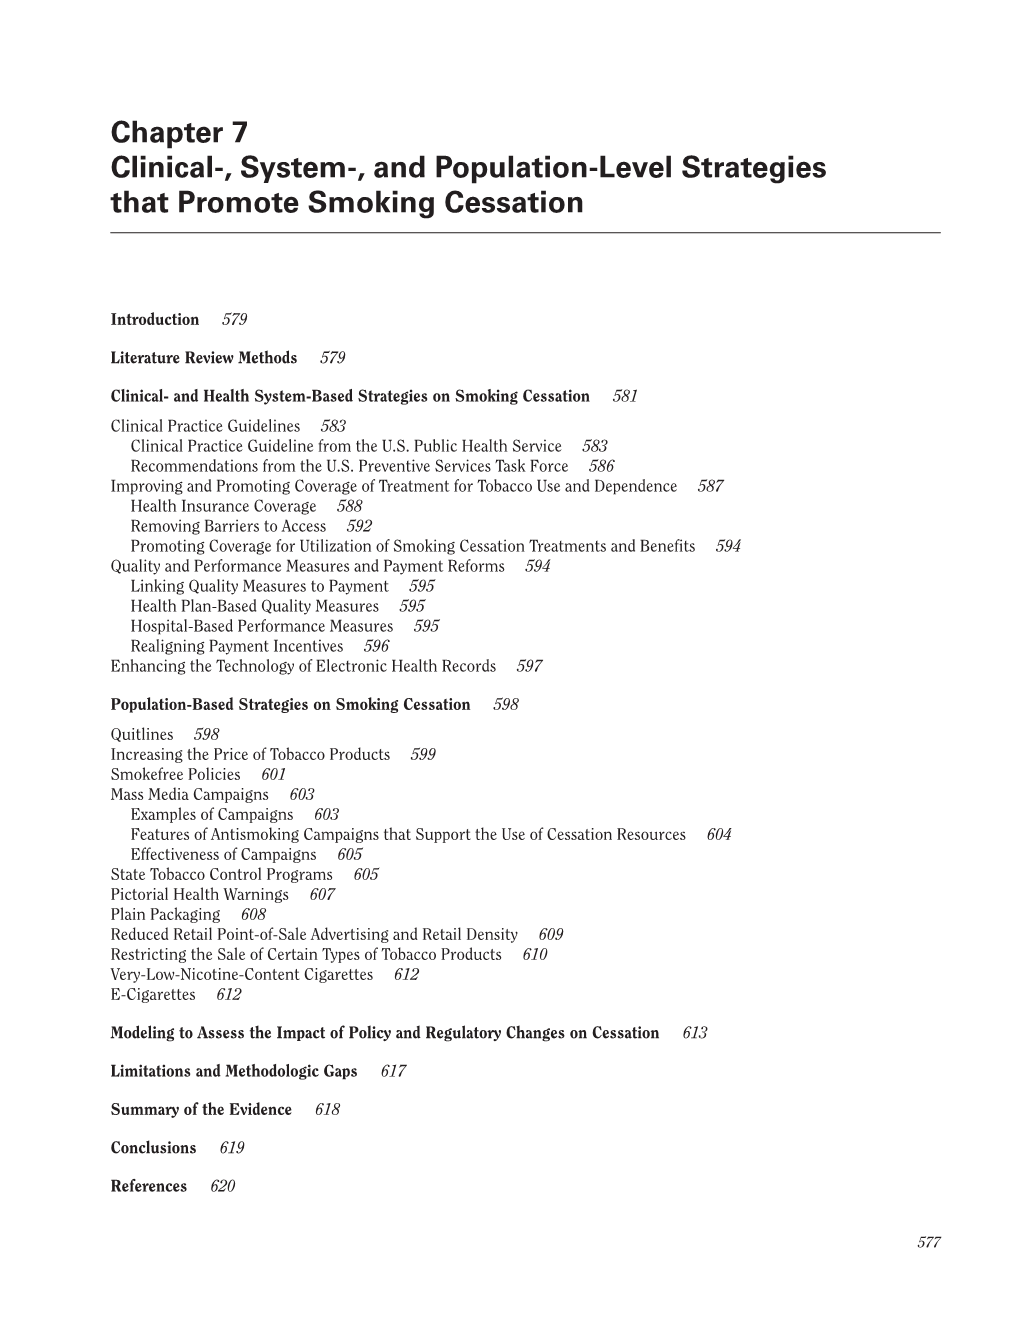 Smoking Cessation: a Report of the Surgeon General, 2020